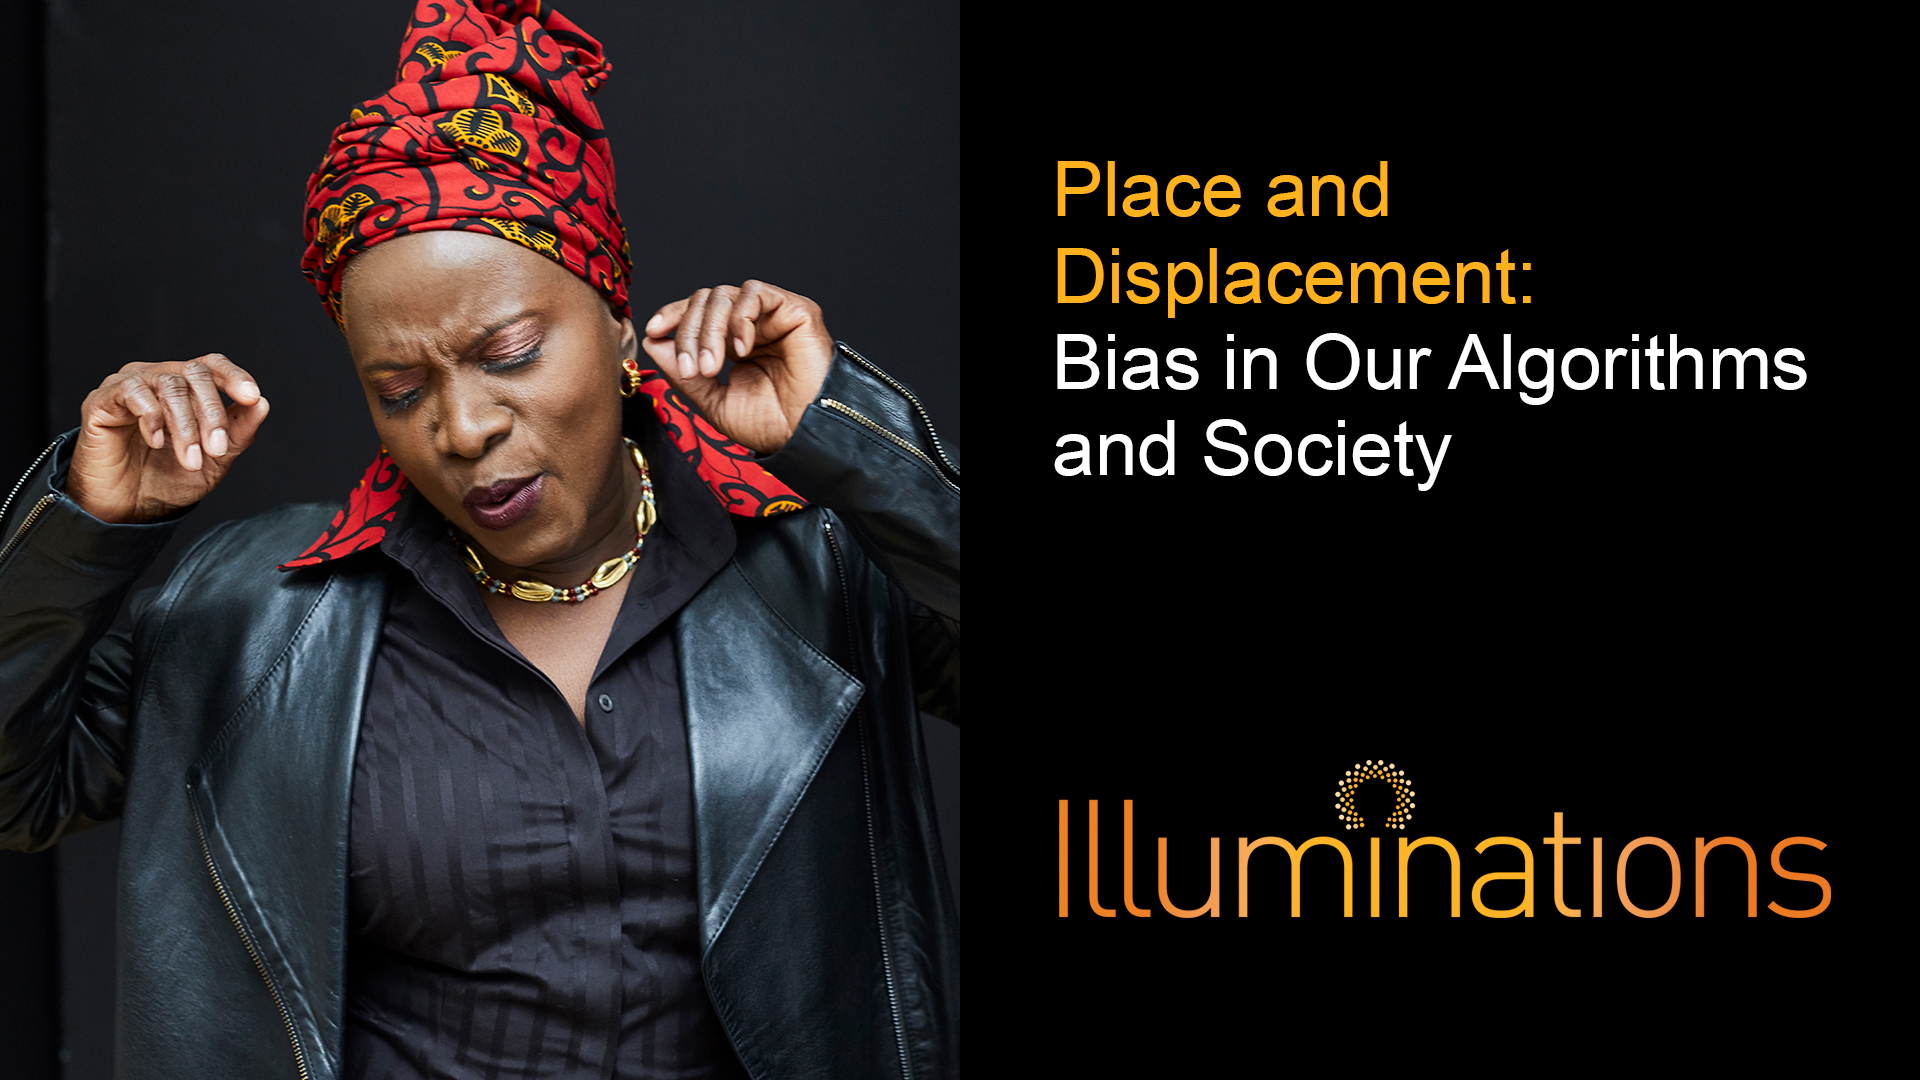 Place and Displacement: Bias in Our Algorithms and Society